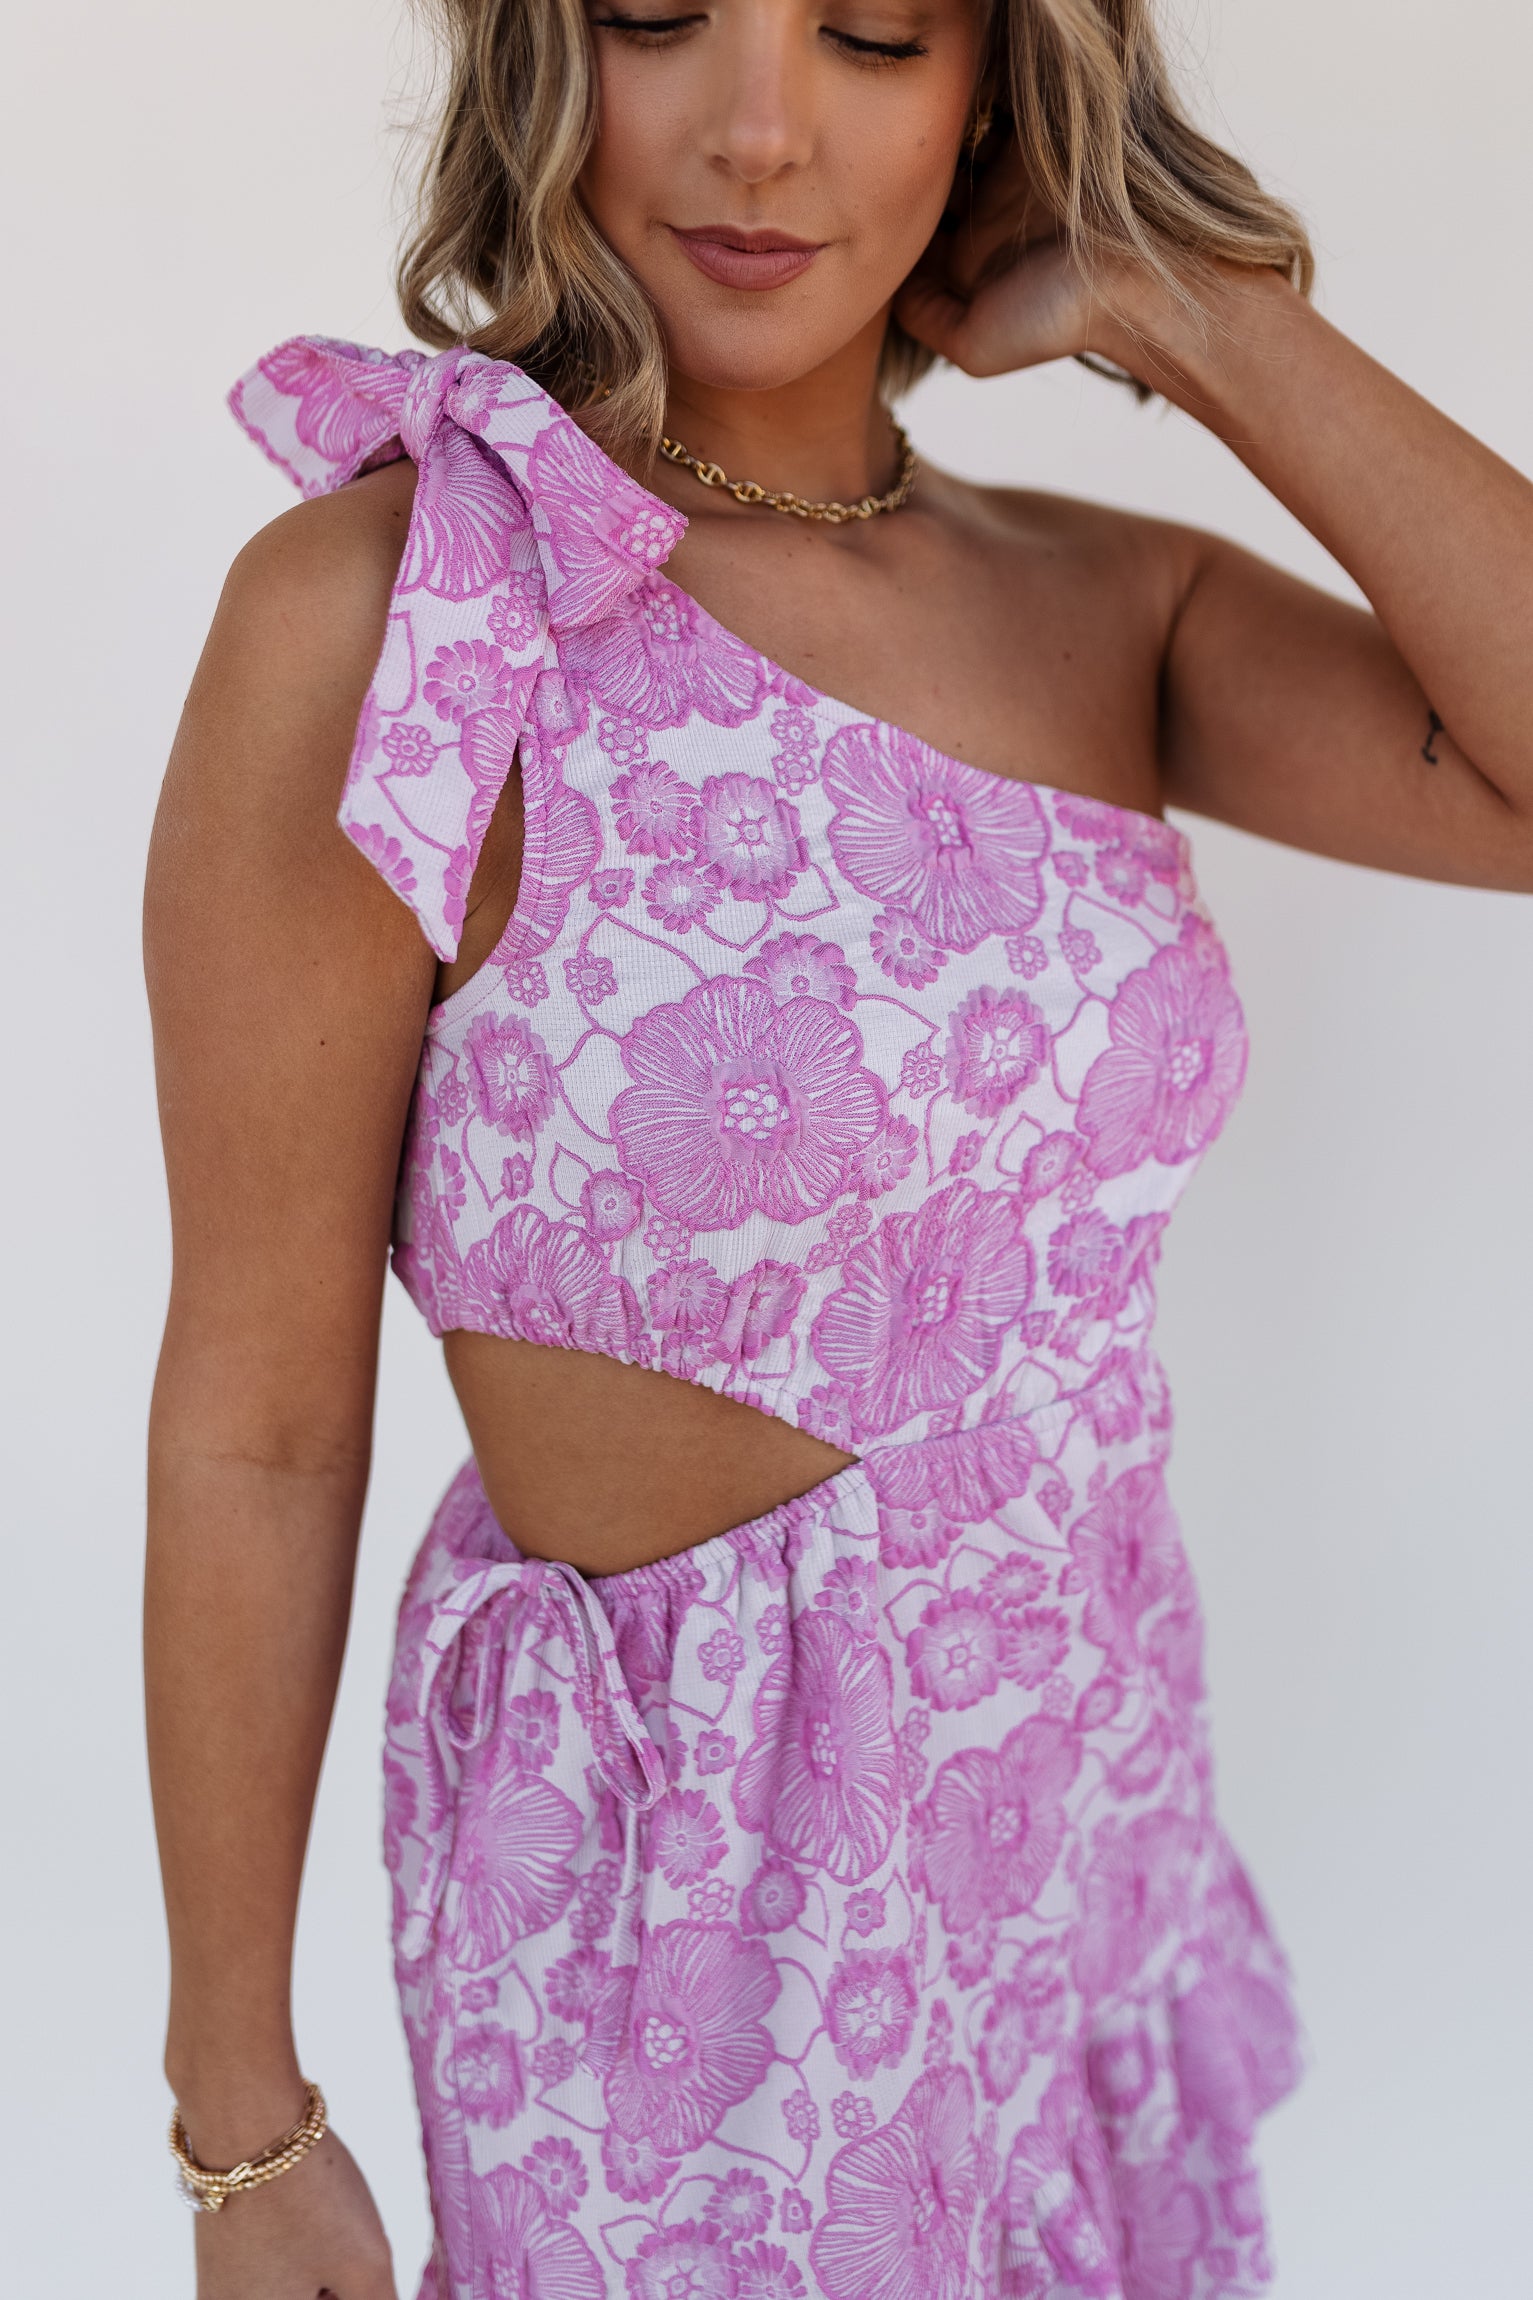 Close up view of model wearing the Laura Pink Floral One-Shoulder Dress which features light pink and pink textured fabric, mini length, flare hem skirt, floral print, elastic waistband, side cut-out detail with drawstring tie, one shoulder strap with bow detail and sleeveless.